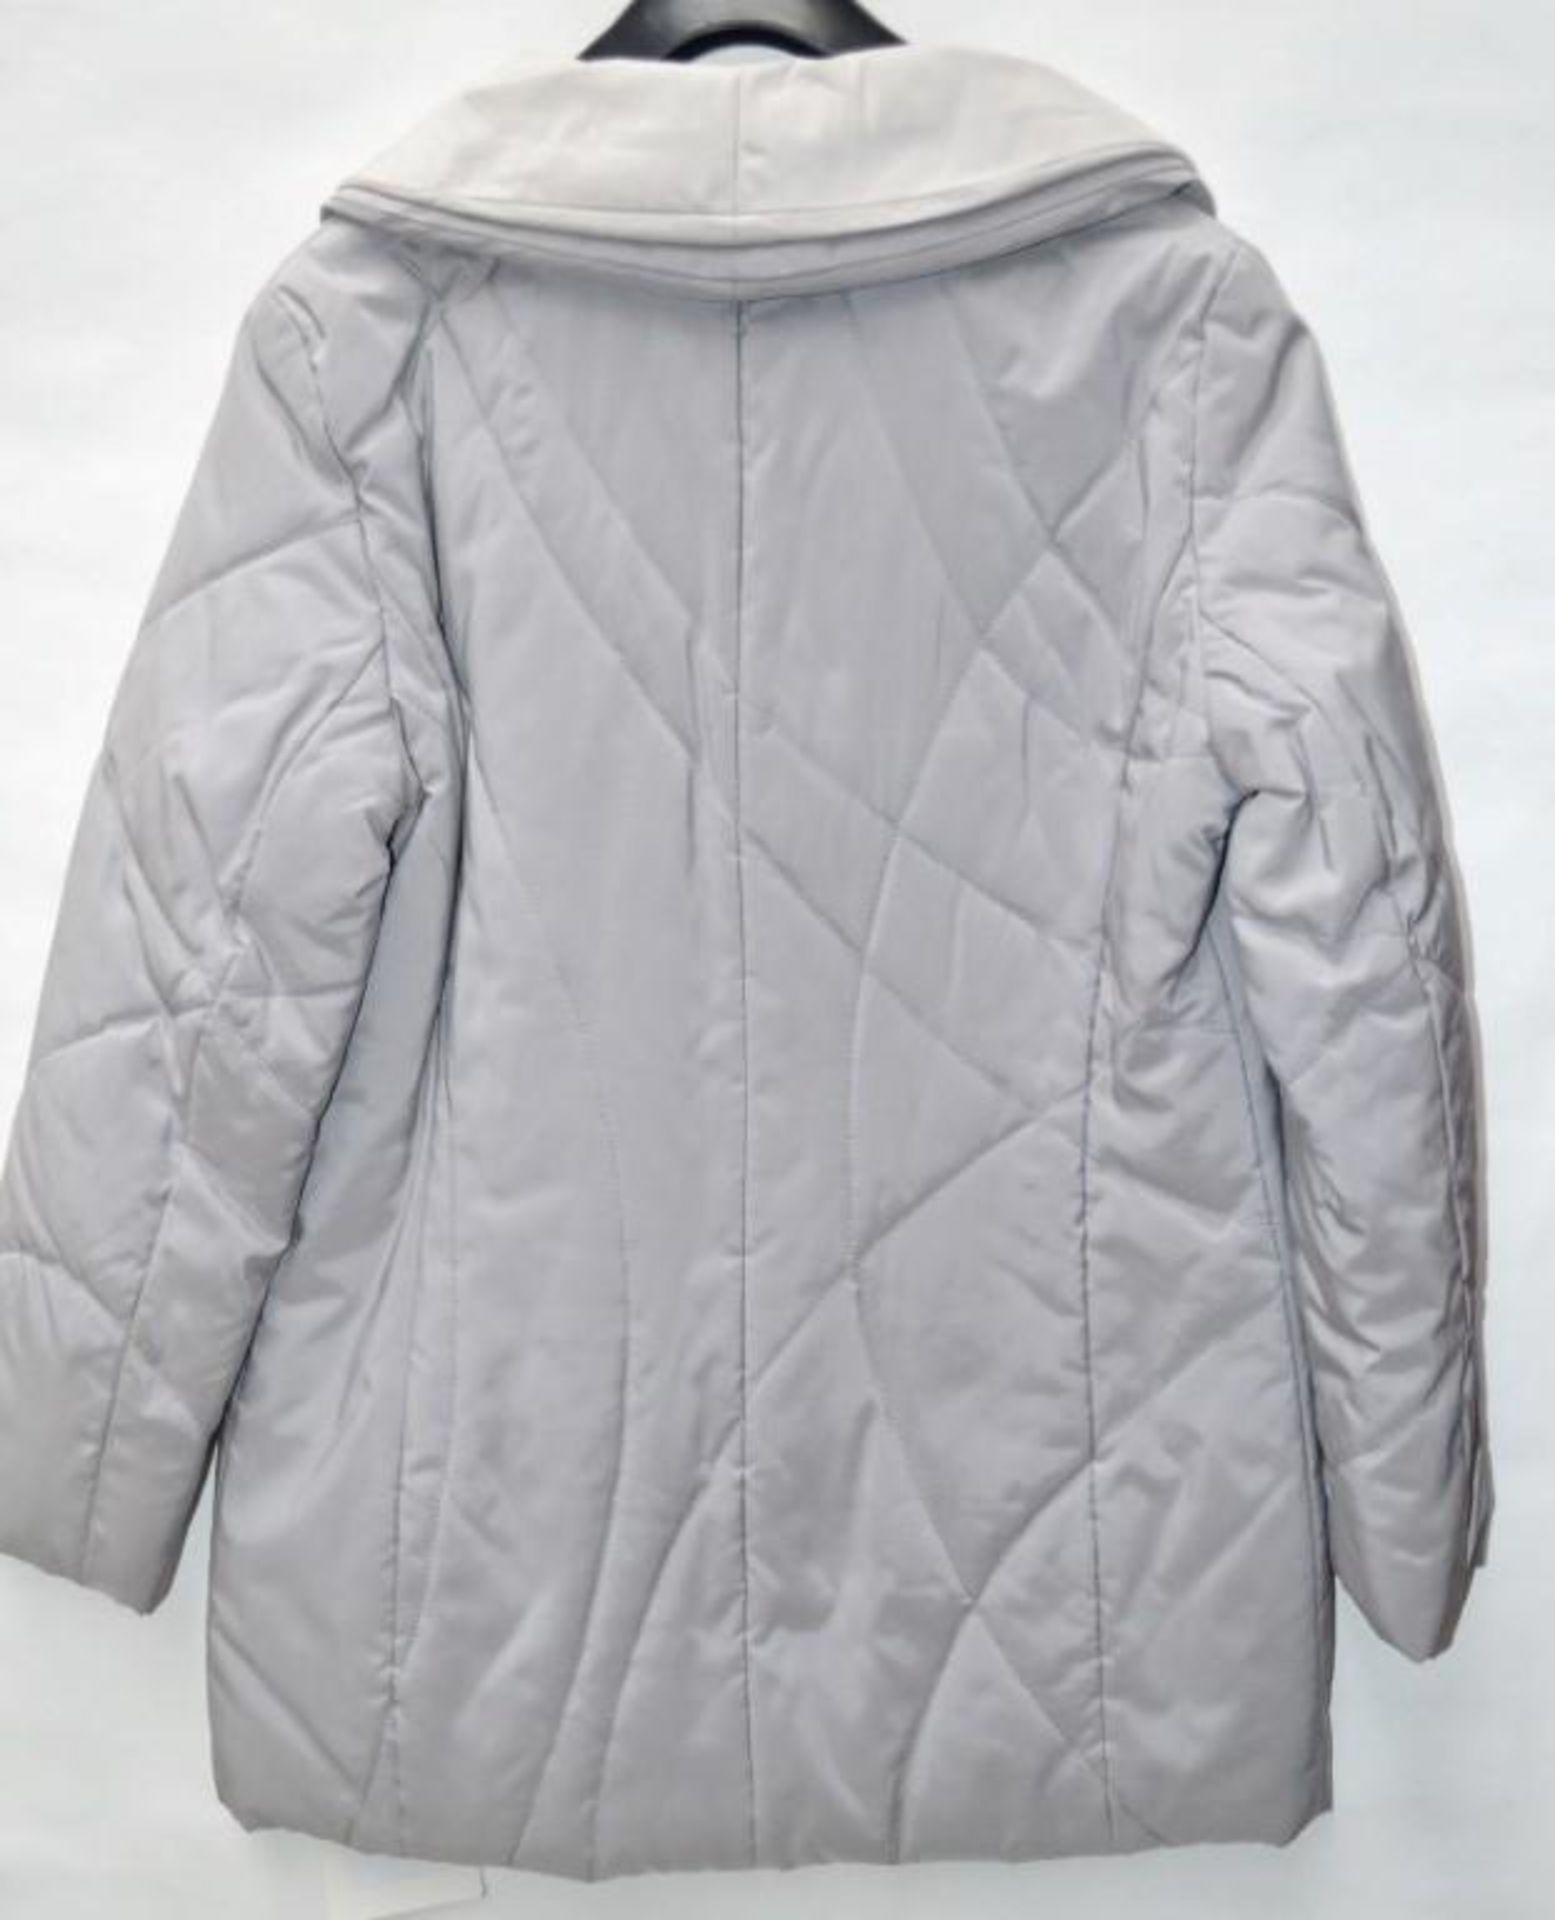 1 x Steilmann Kirsten Womens Padded Coat In Silver - Size 12 - CL210 - Ref MT492 - Location: Altrinc - Image 4 of 4